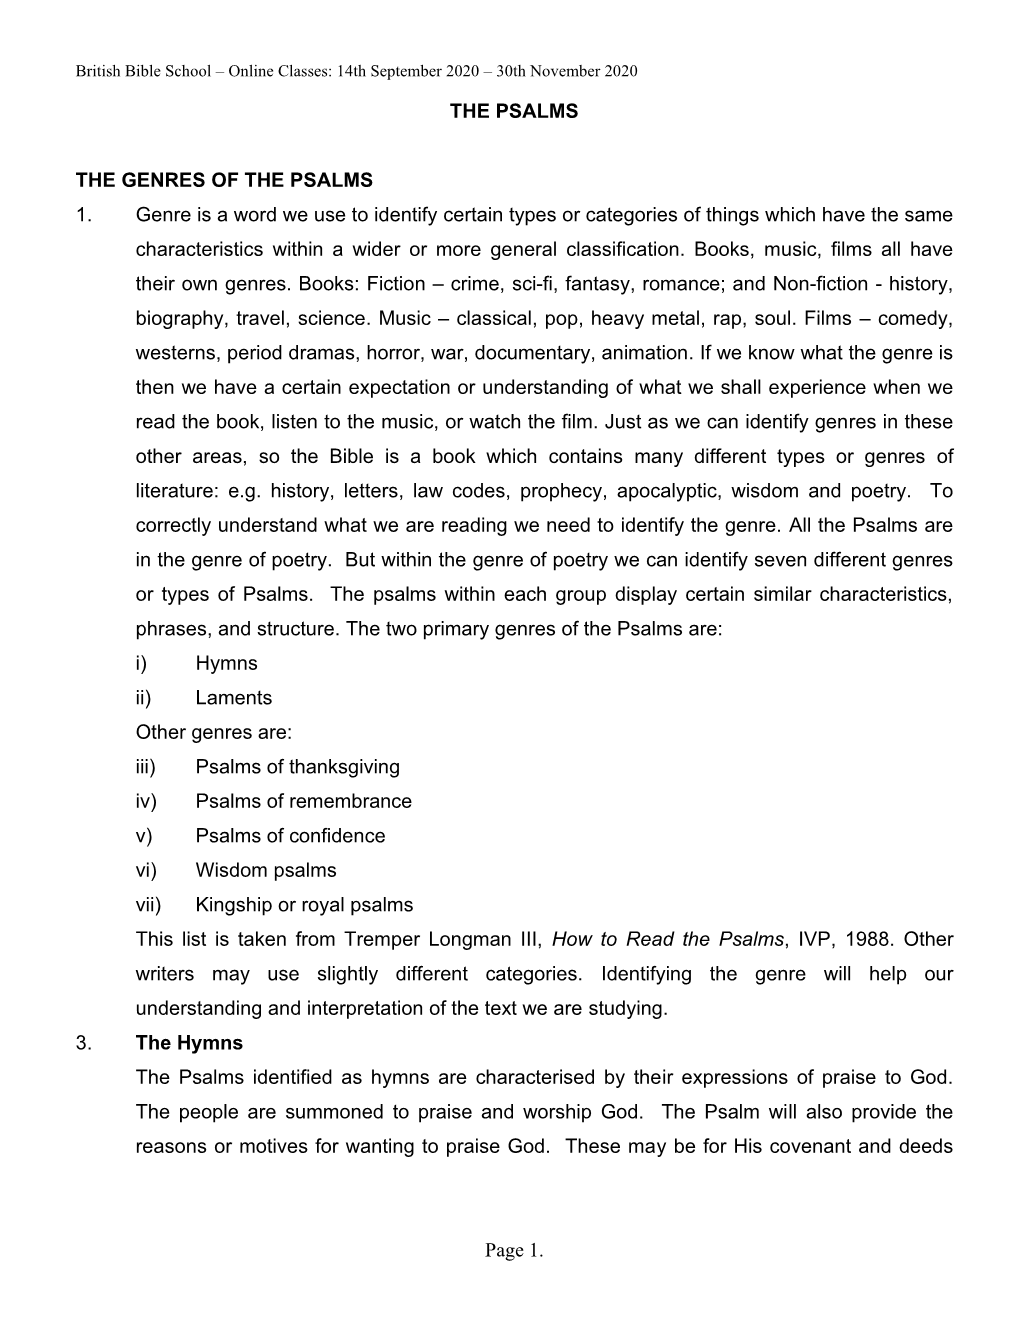 Genres-Of-The-Psalms.Pdf